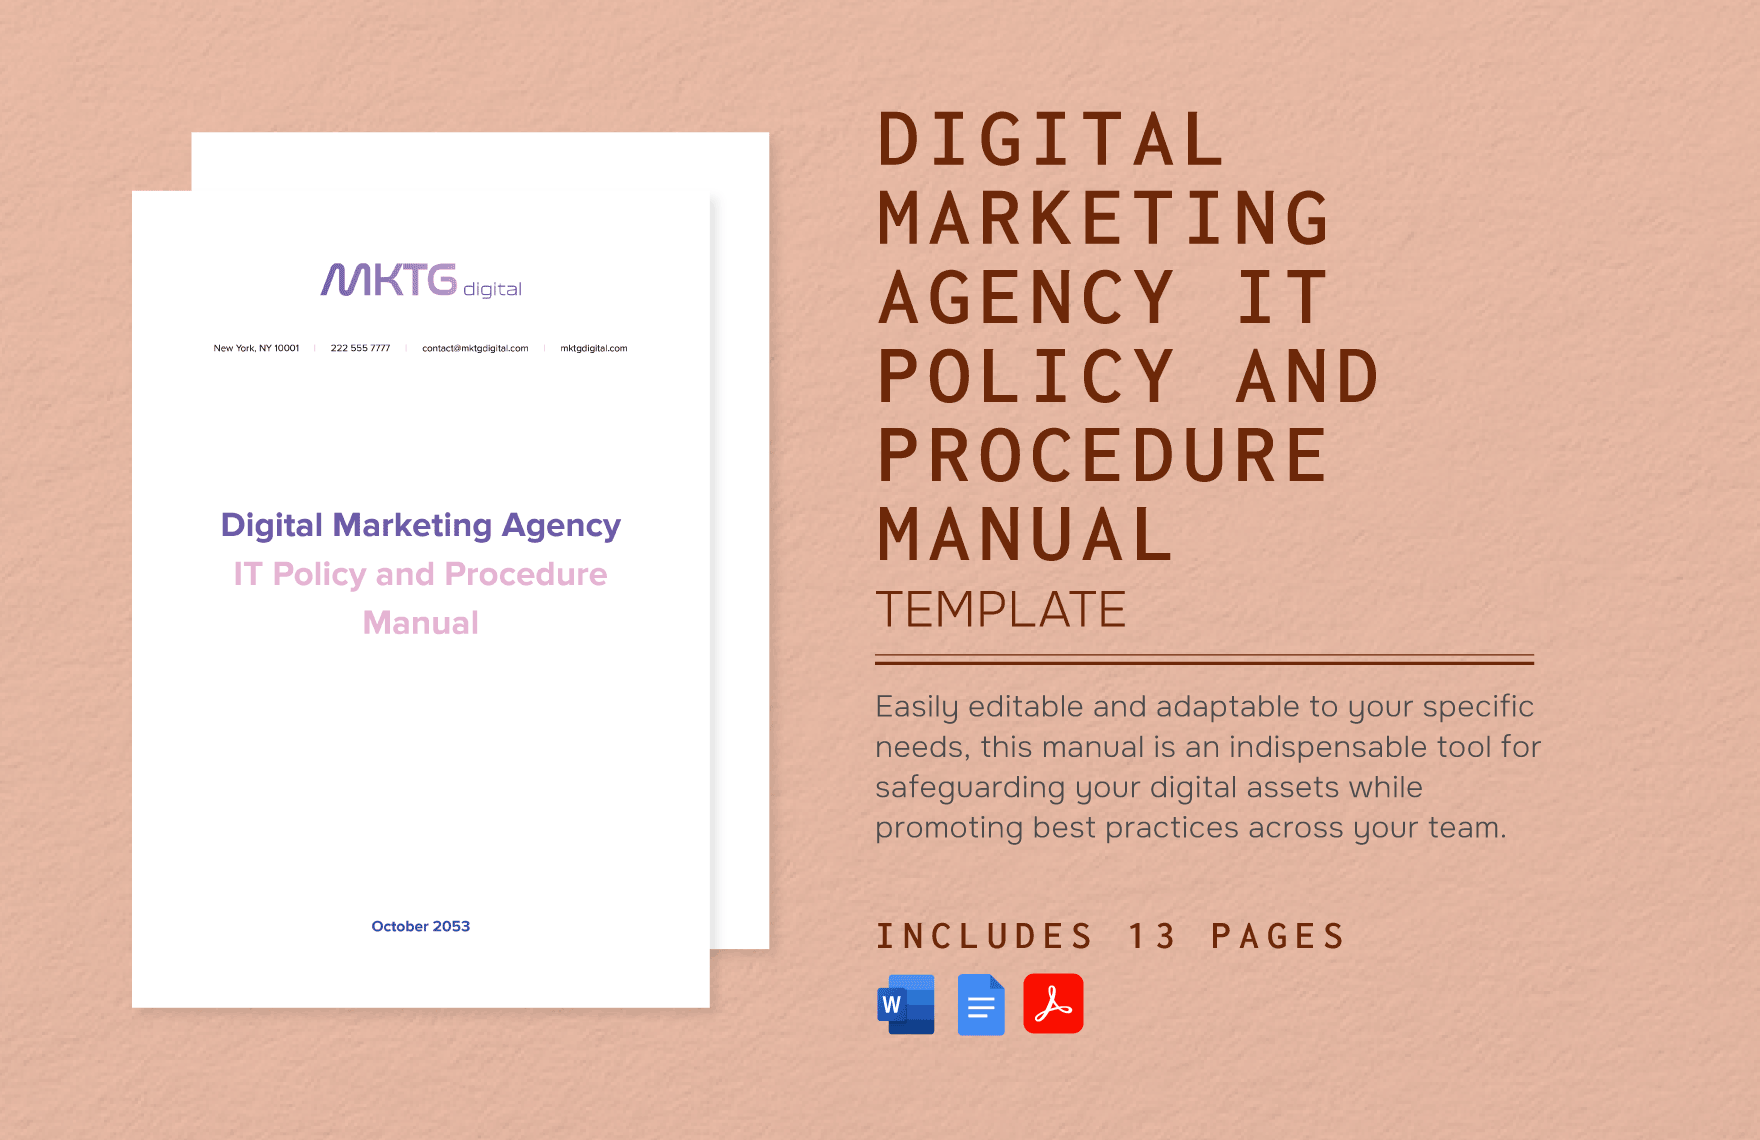 Digital Marketing Agency IT Policy and Procedure Manual Template